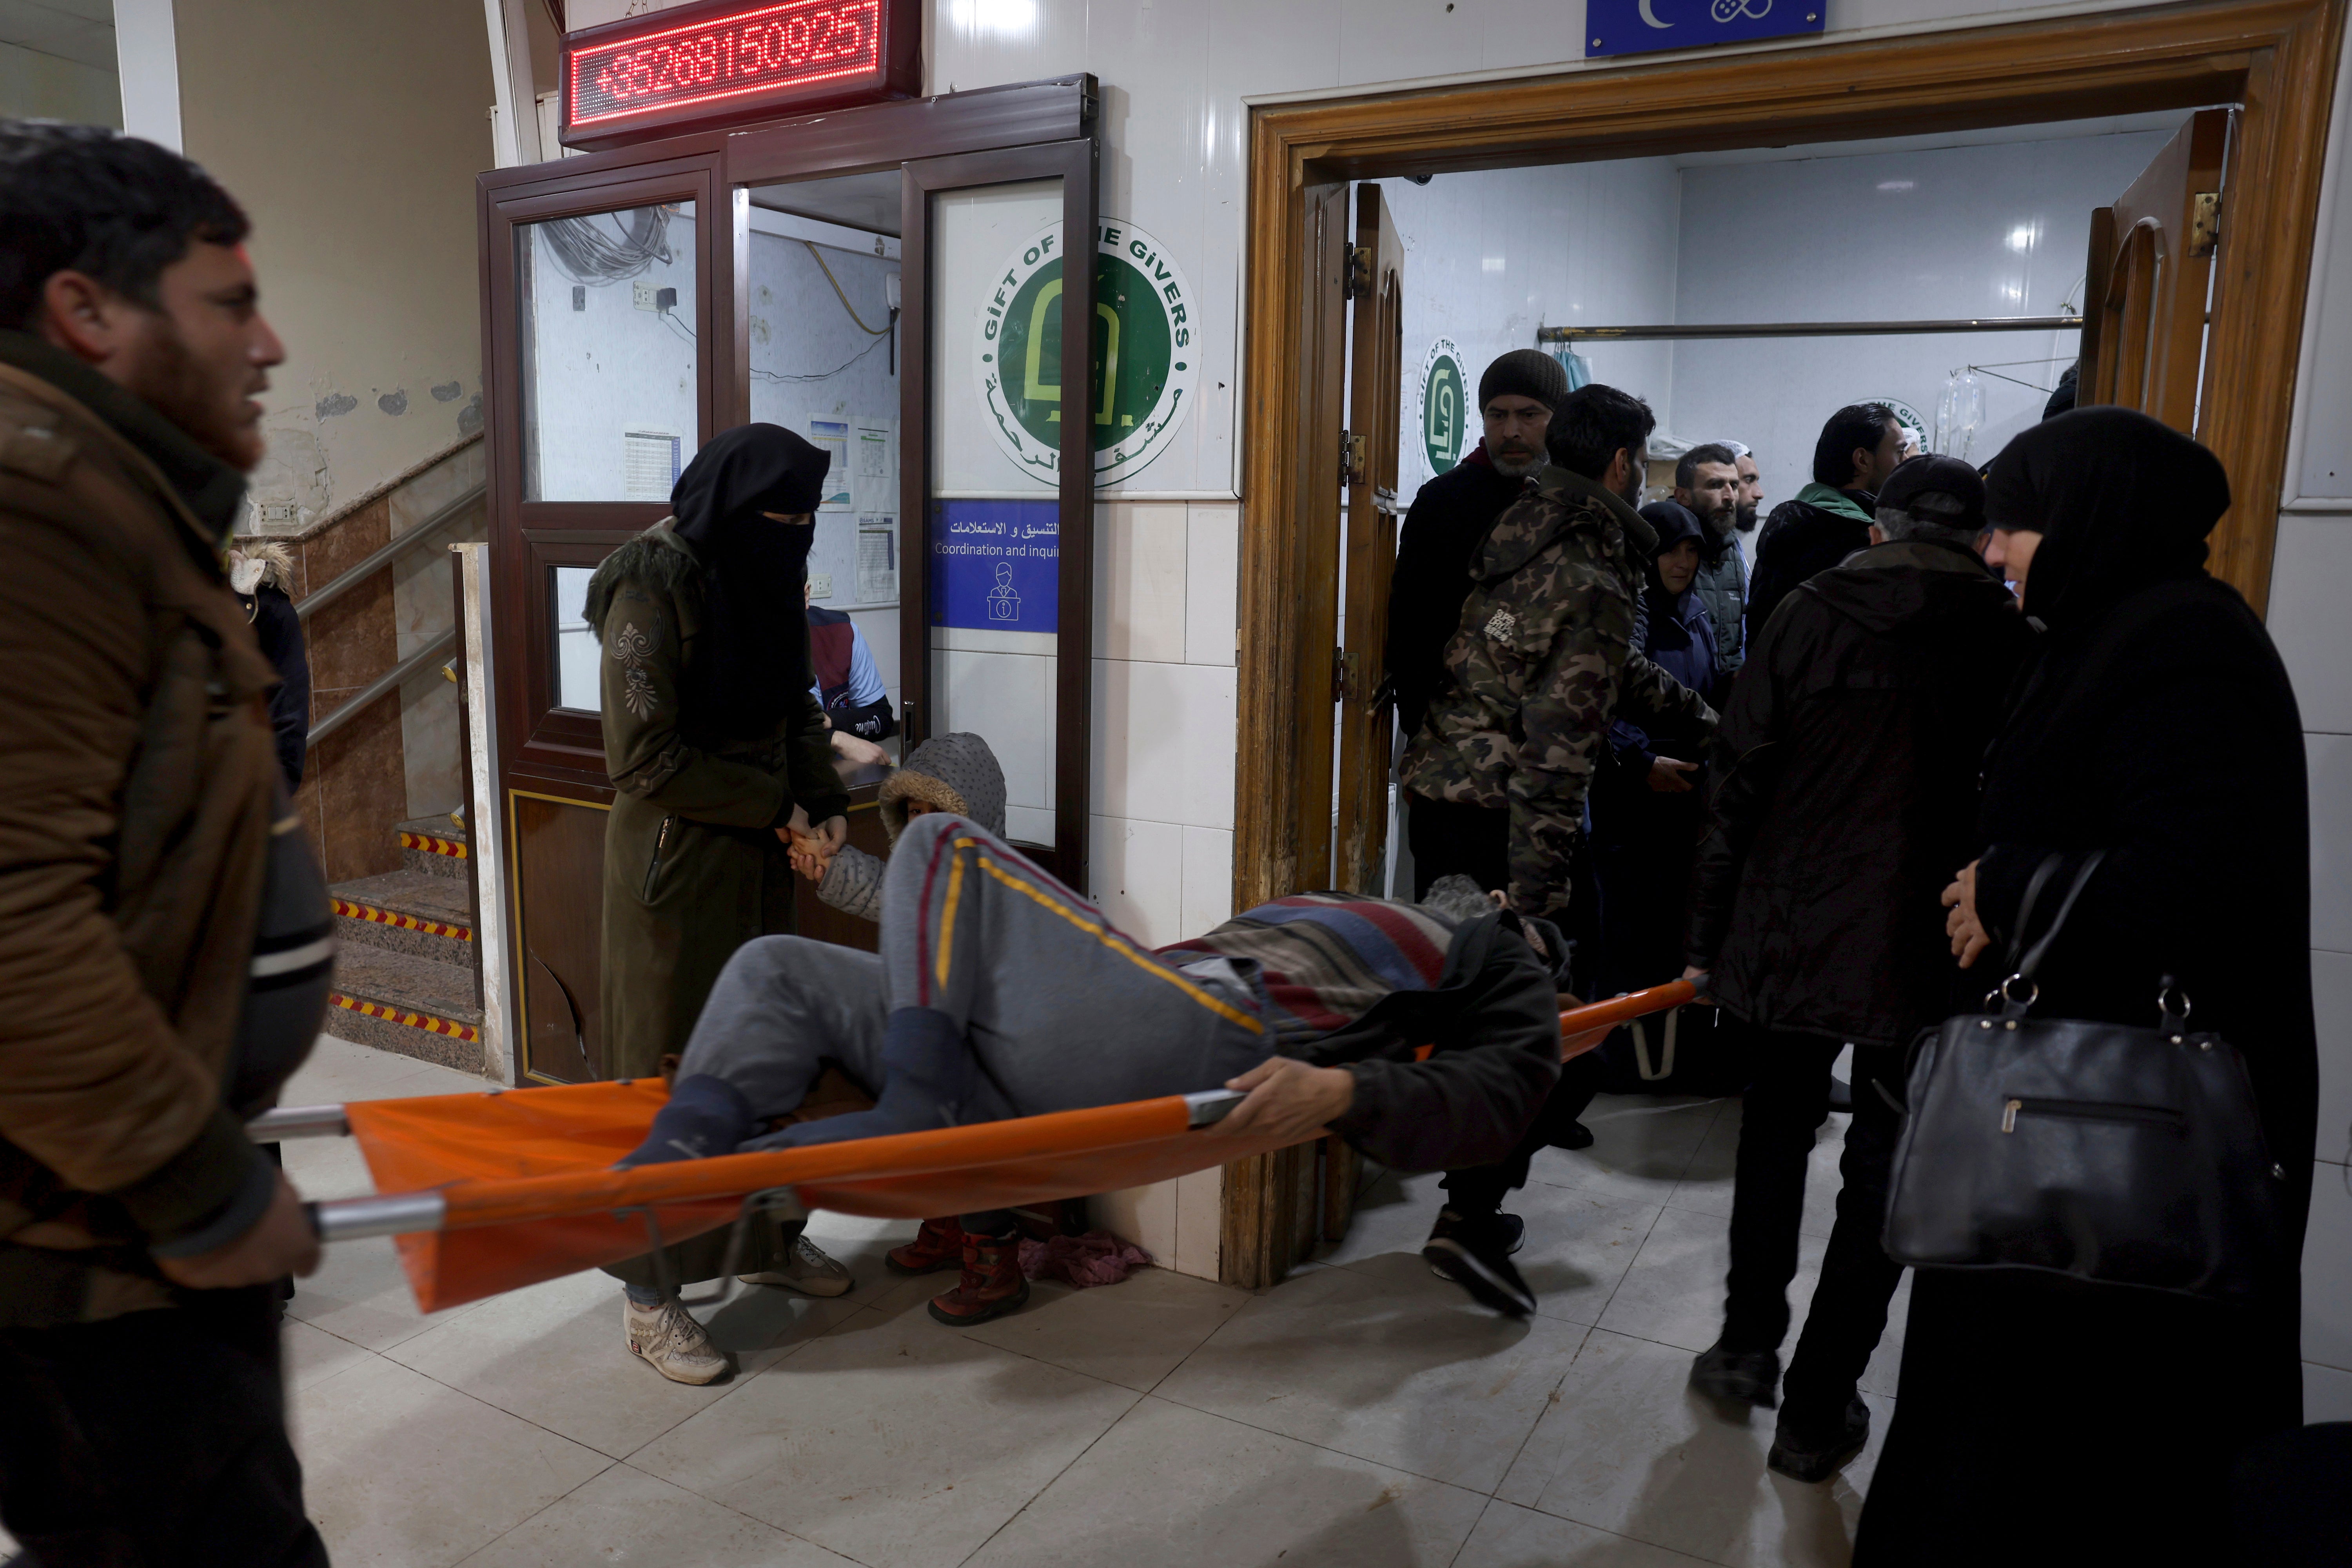 A man injured in the quake is carried into the al-Rahma hospital in Darkush, Idlib province